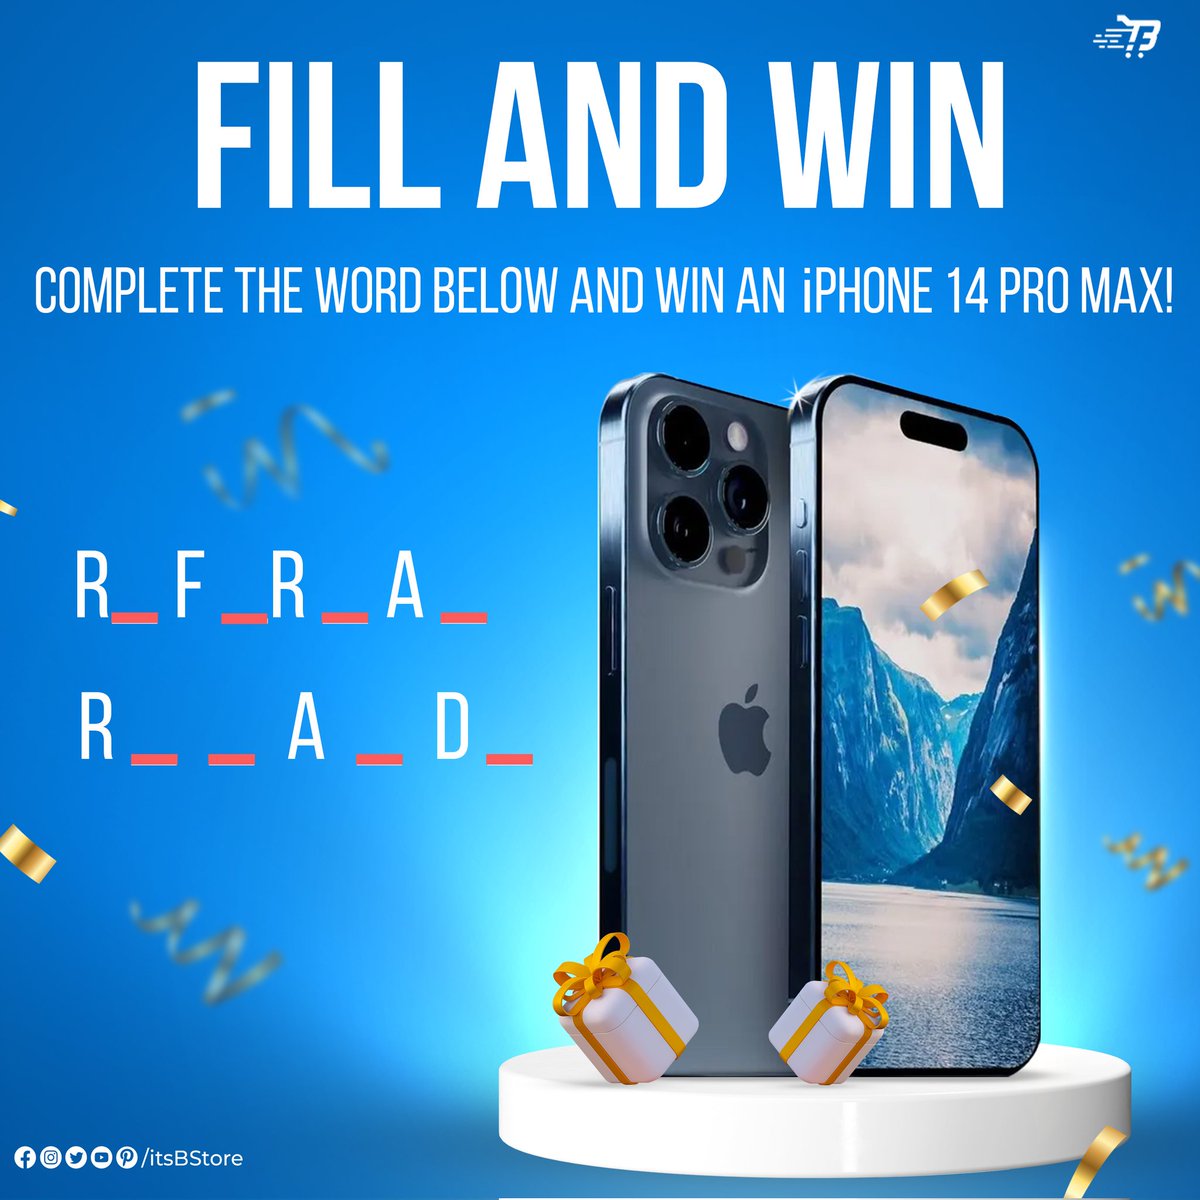 Find the missing letters and win an iPhone 14 Pro Max!
(Hint: You can earn 5% profit through this feature on B-Store)
@BLoveNTWK
#Bstore #Bfamily #DigitalMarketplace #sellyourproducts #ecommercestore #onlineshopping #GlobalCommerce #OnlineRetail #RetailFuture #DigitalPayments